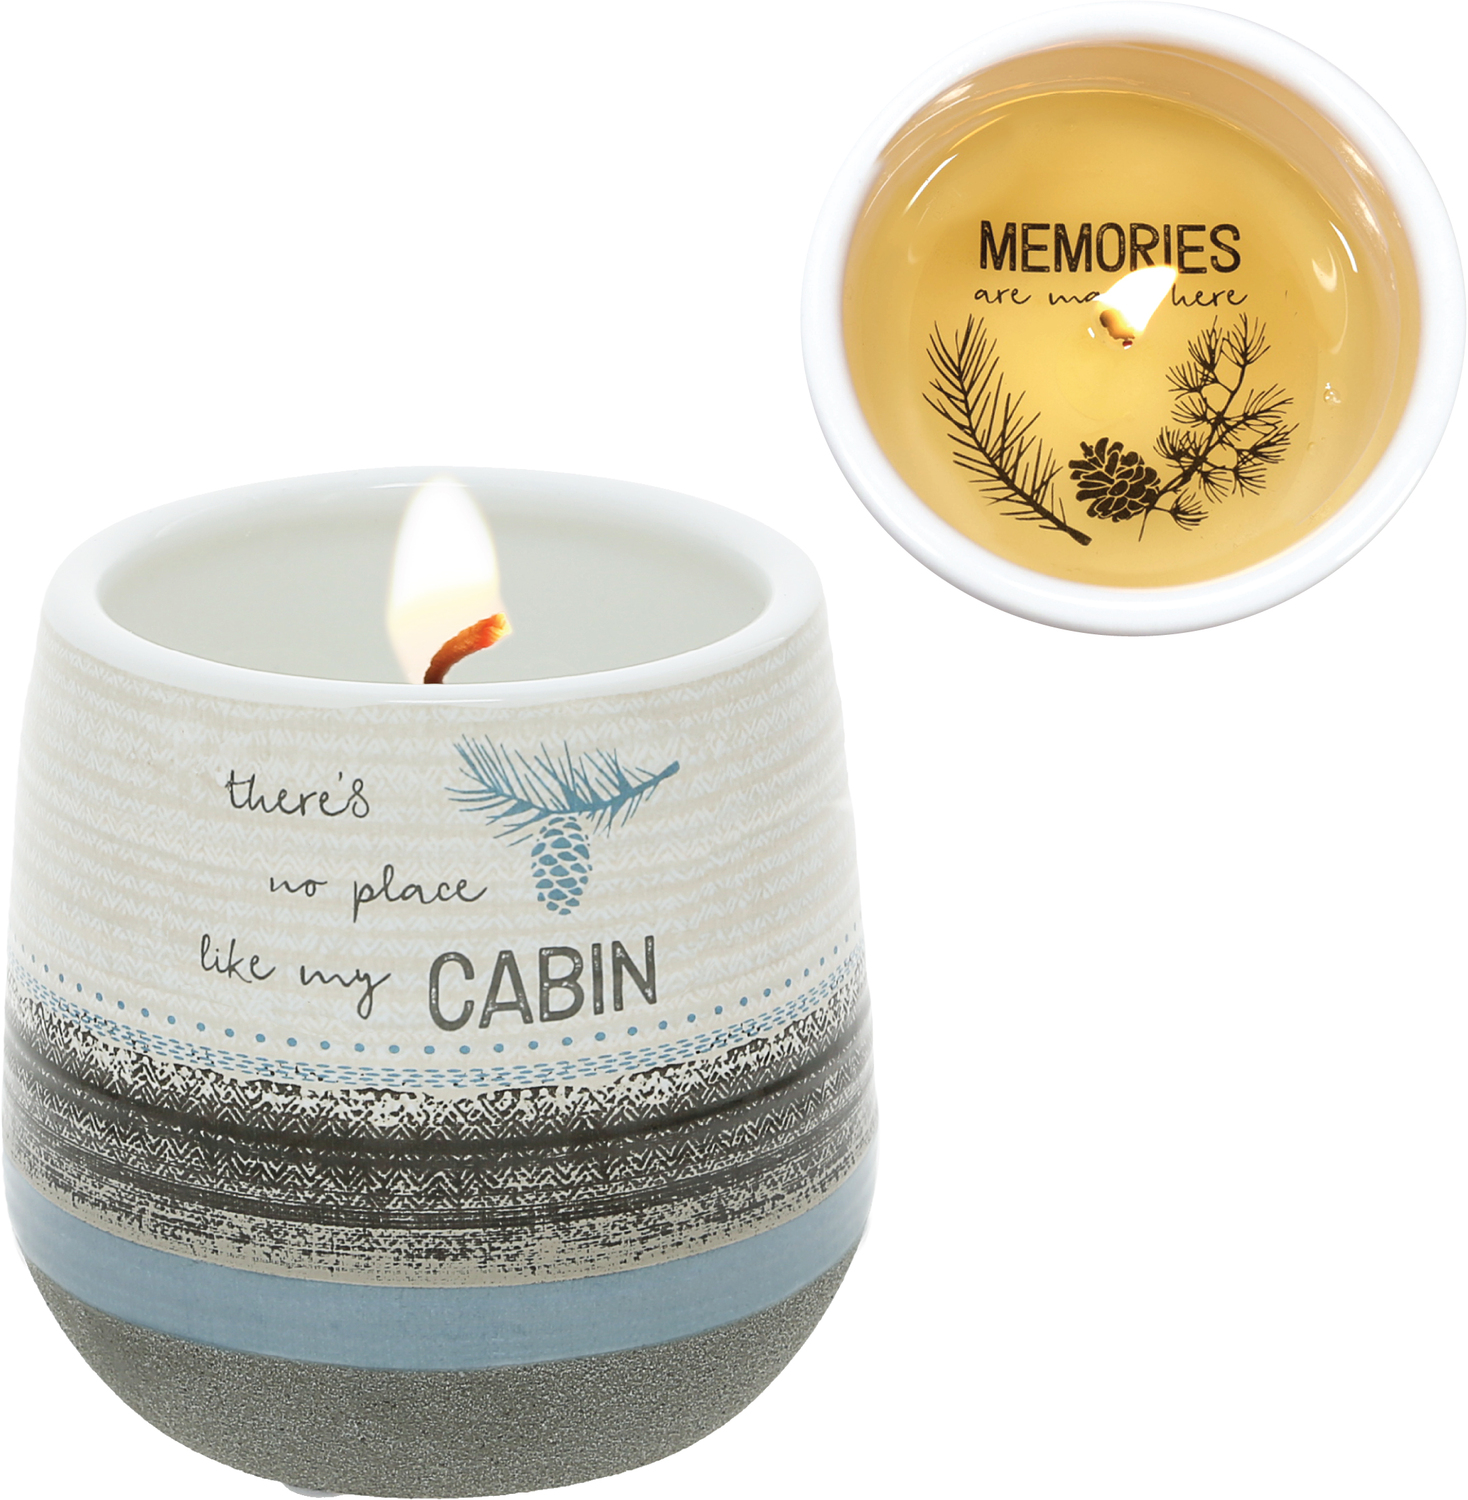 My Cabin by Wild Woods Lodge - My Cabin - 11 oz - 100% Soy Wax Reveal Candle
Scent: Tranquility